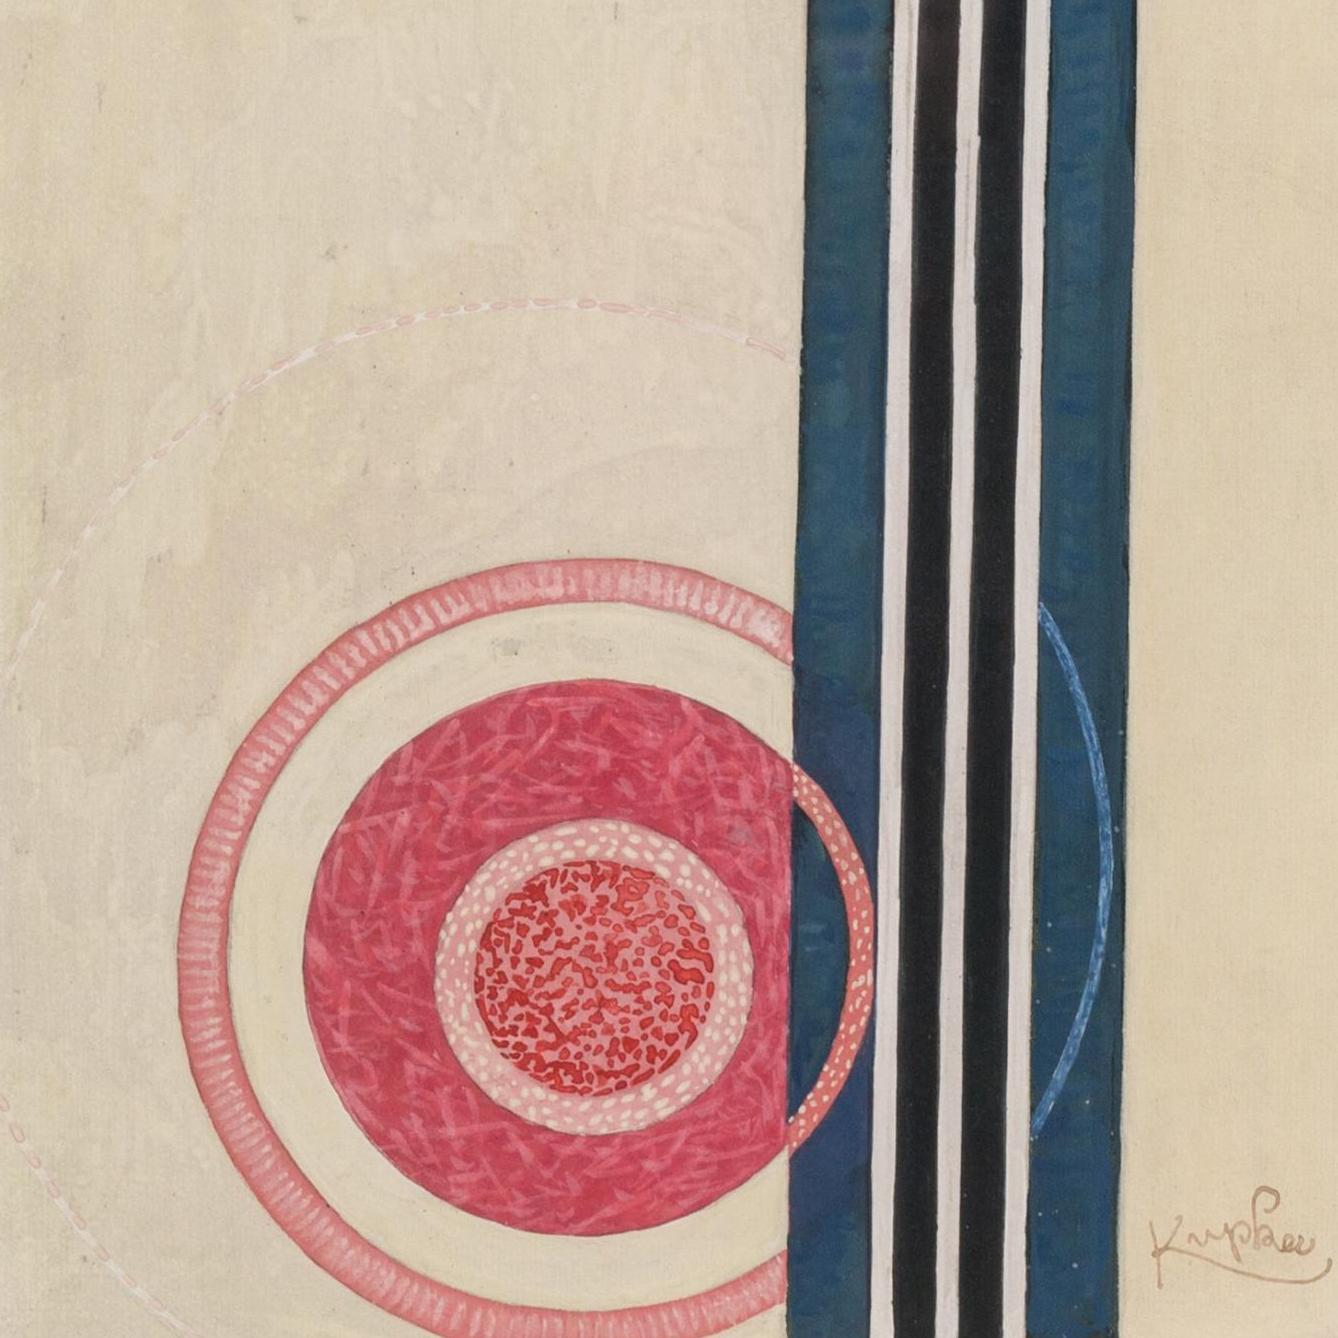 Lots sold - Radiant Kupka: Abstraction and Vitality